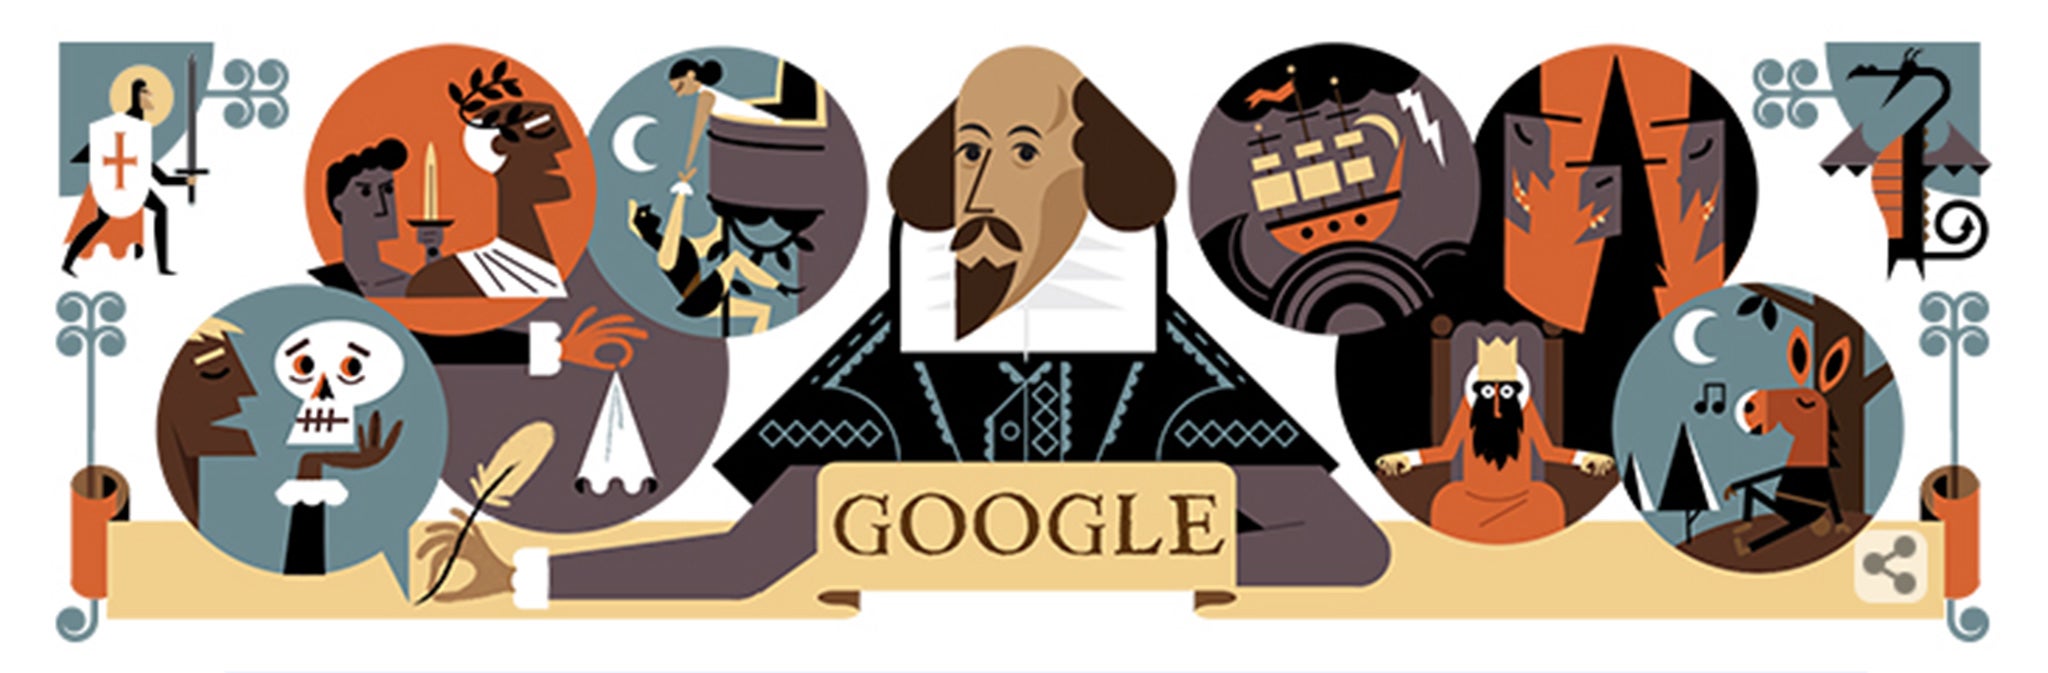 The Google Doodle for 23 April celebrates both Shakespeare and St George's Day